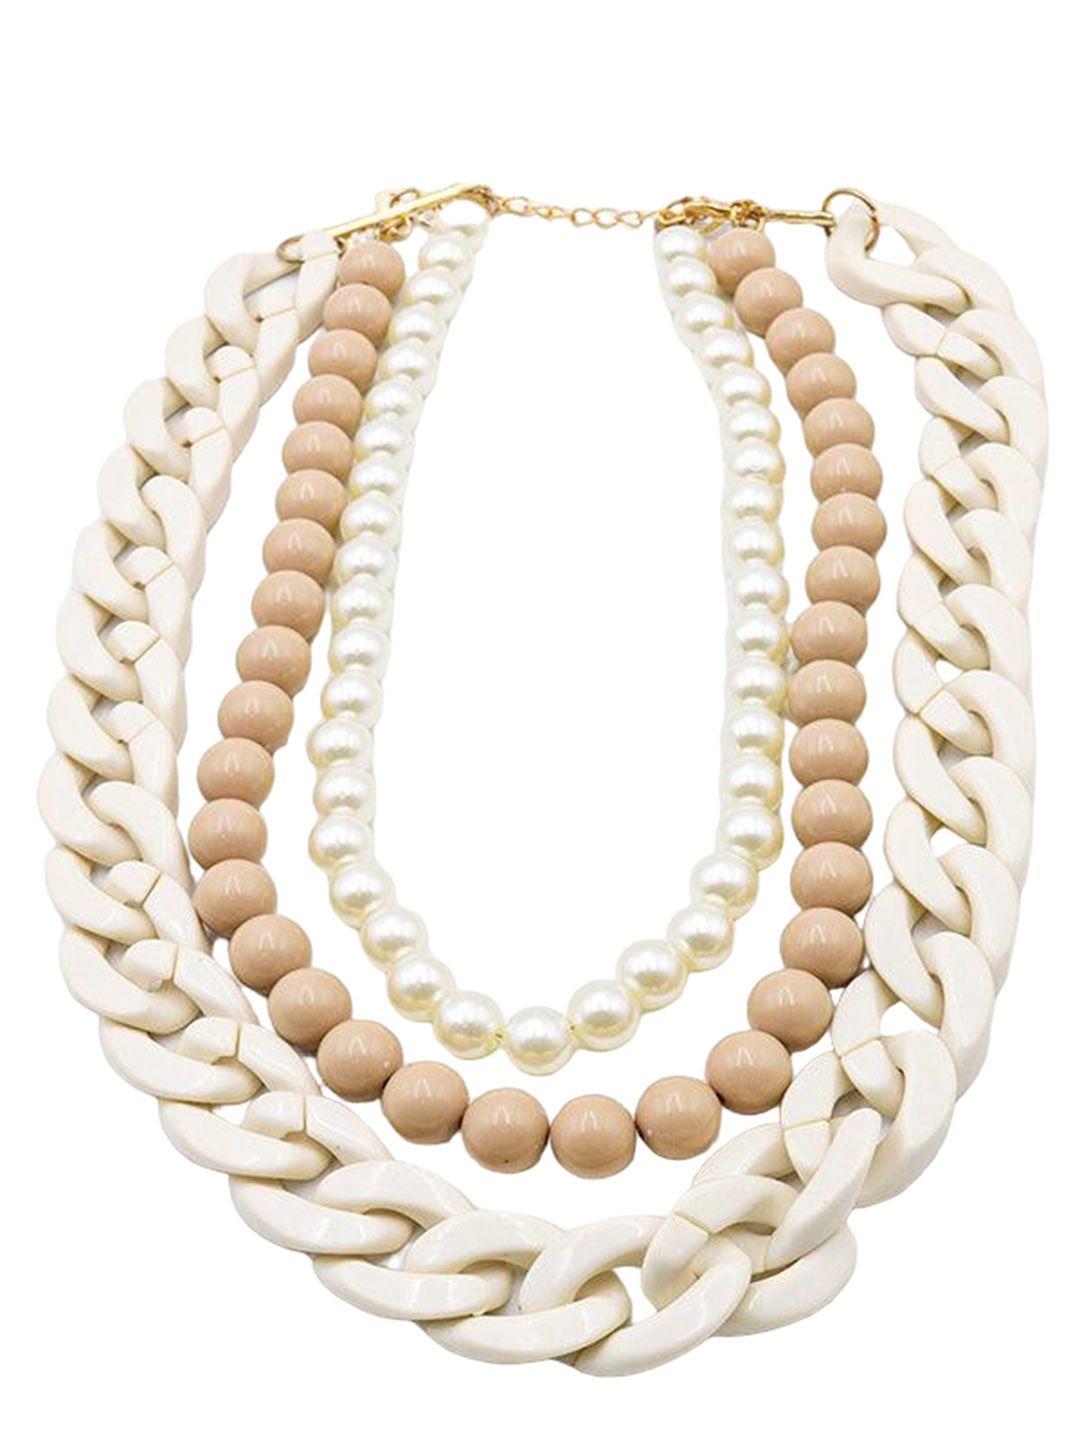 odette white & beige multilayered acrylic necklace